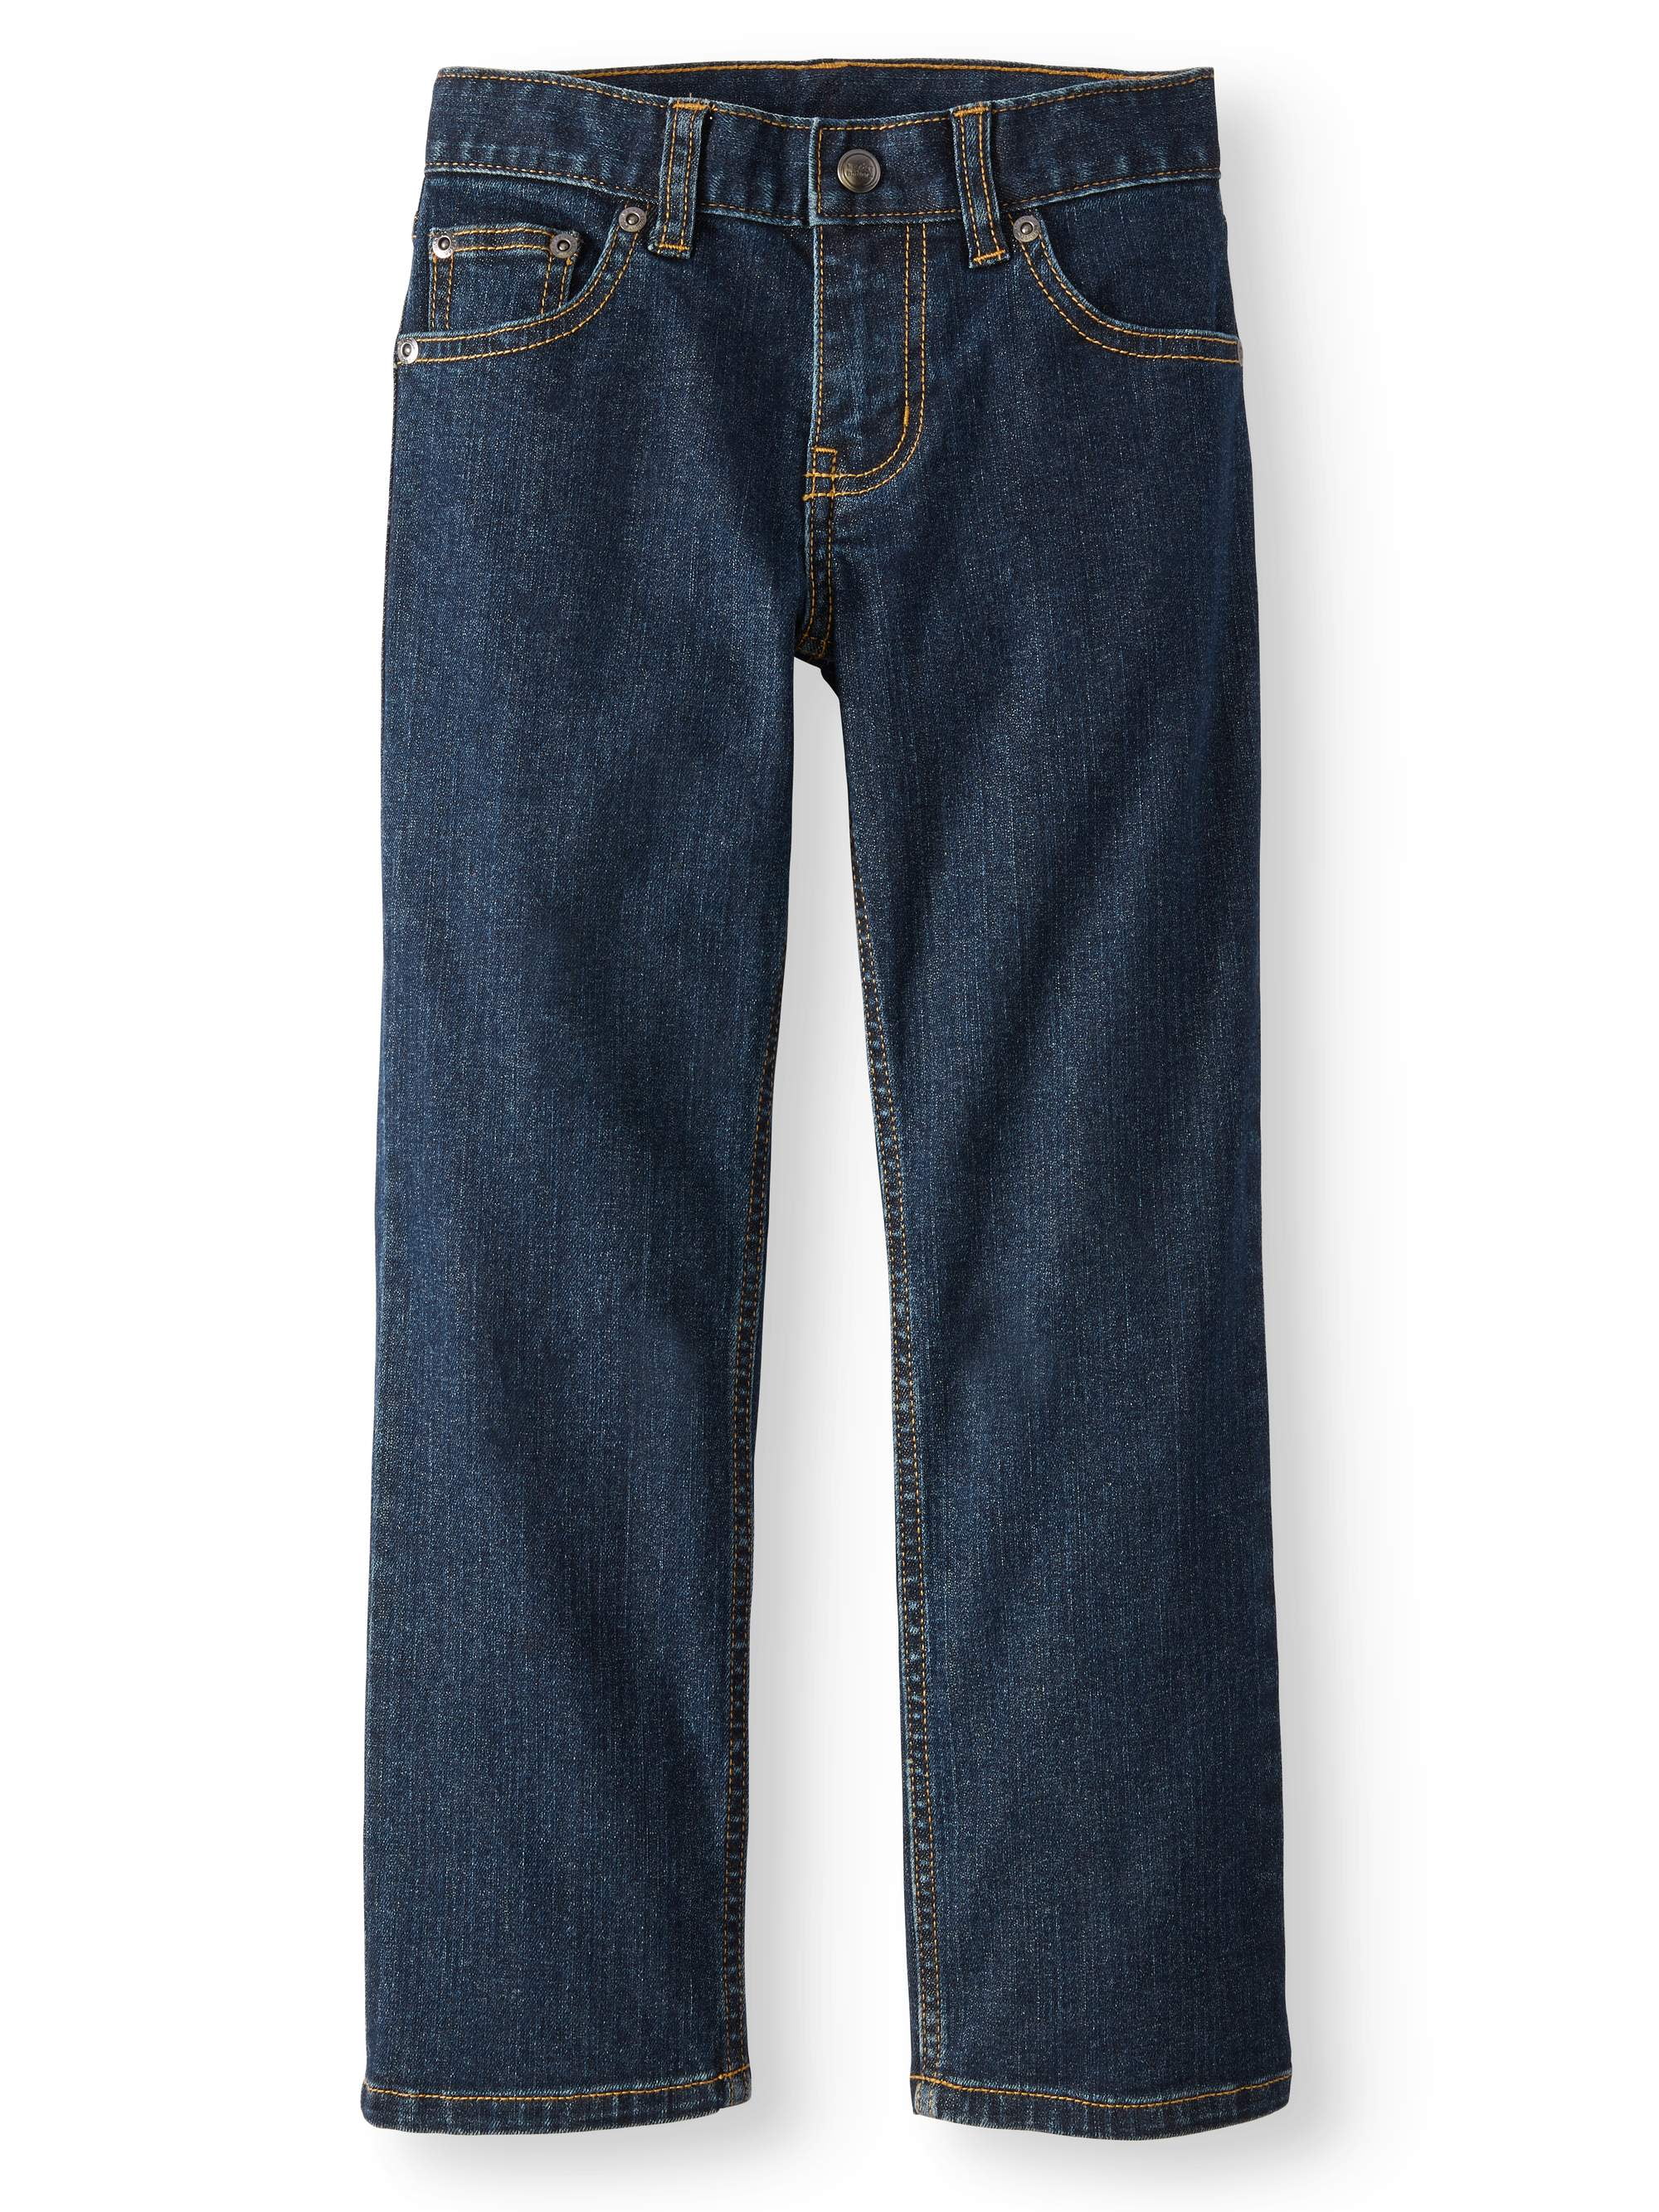 Size 6 Boys Relaxed Jeans 2 Pack 